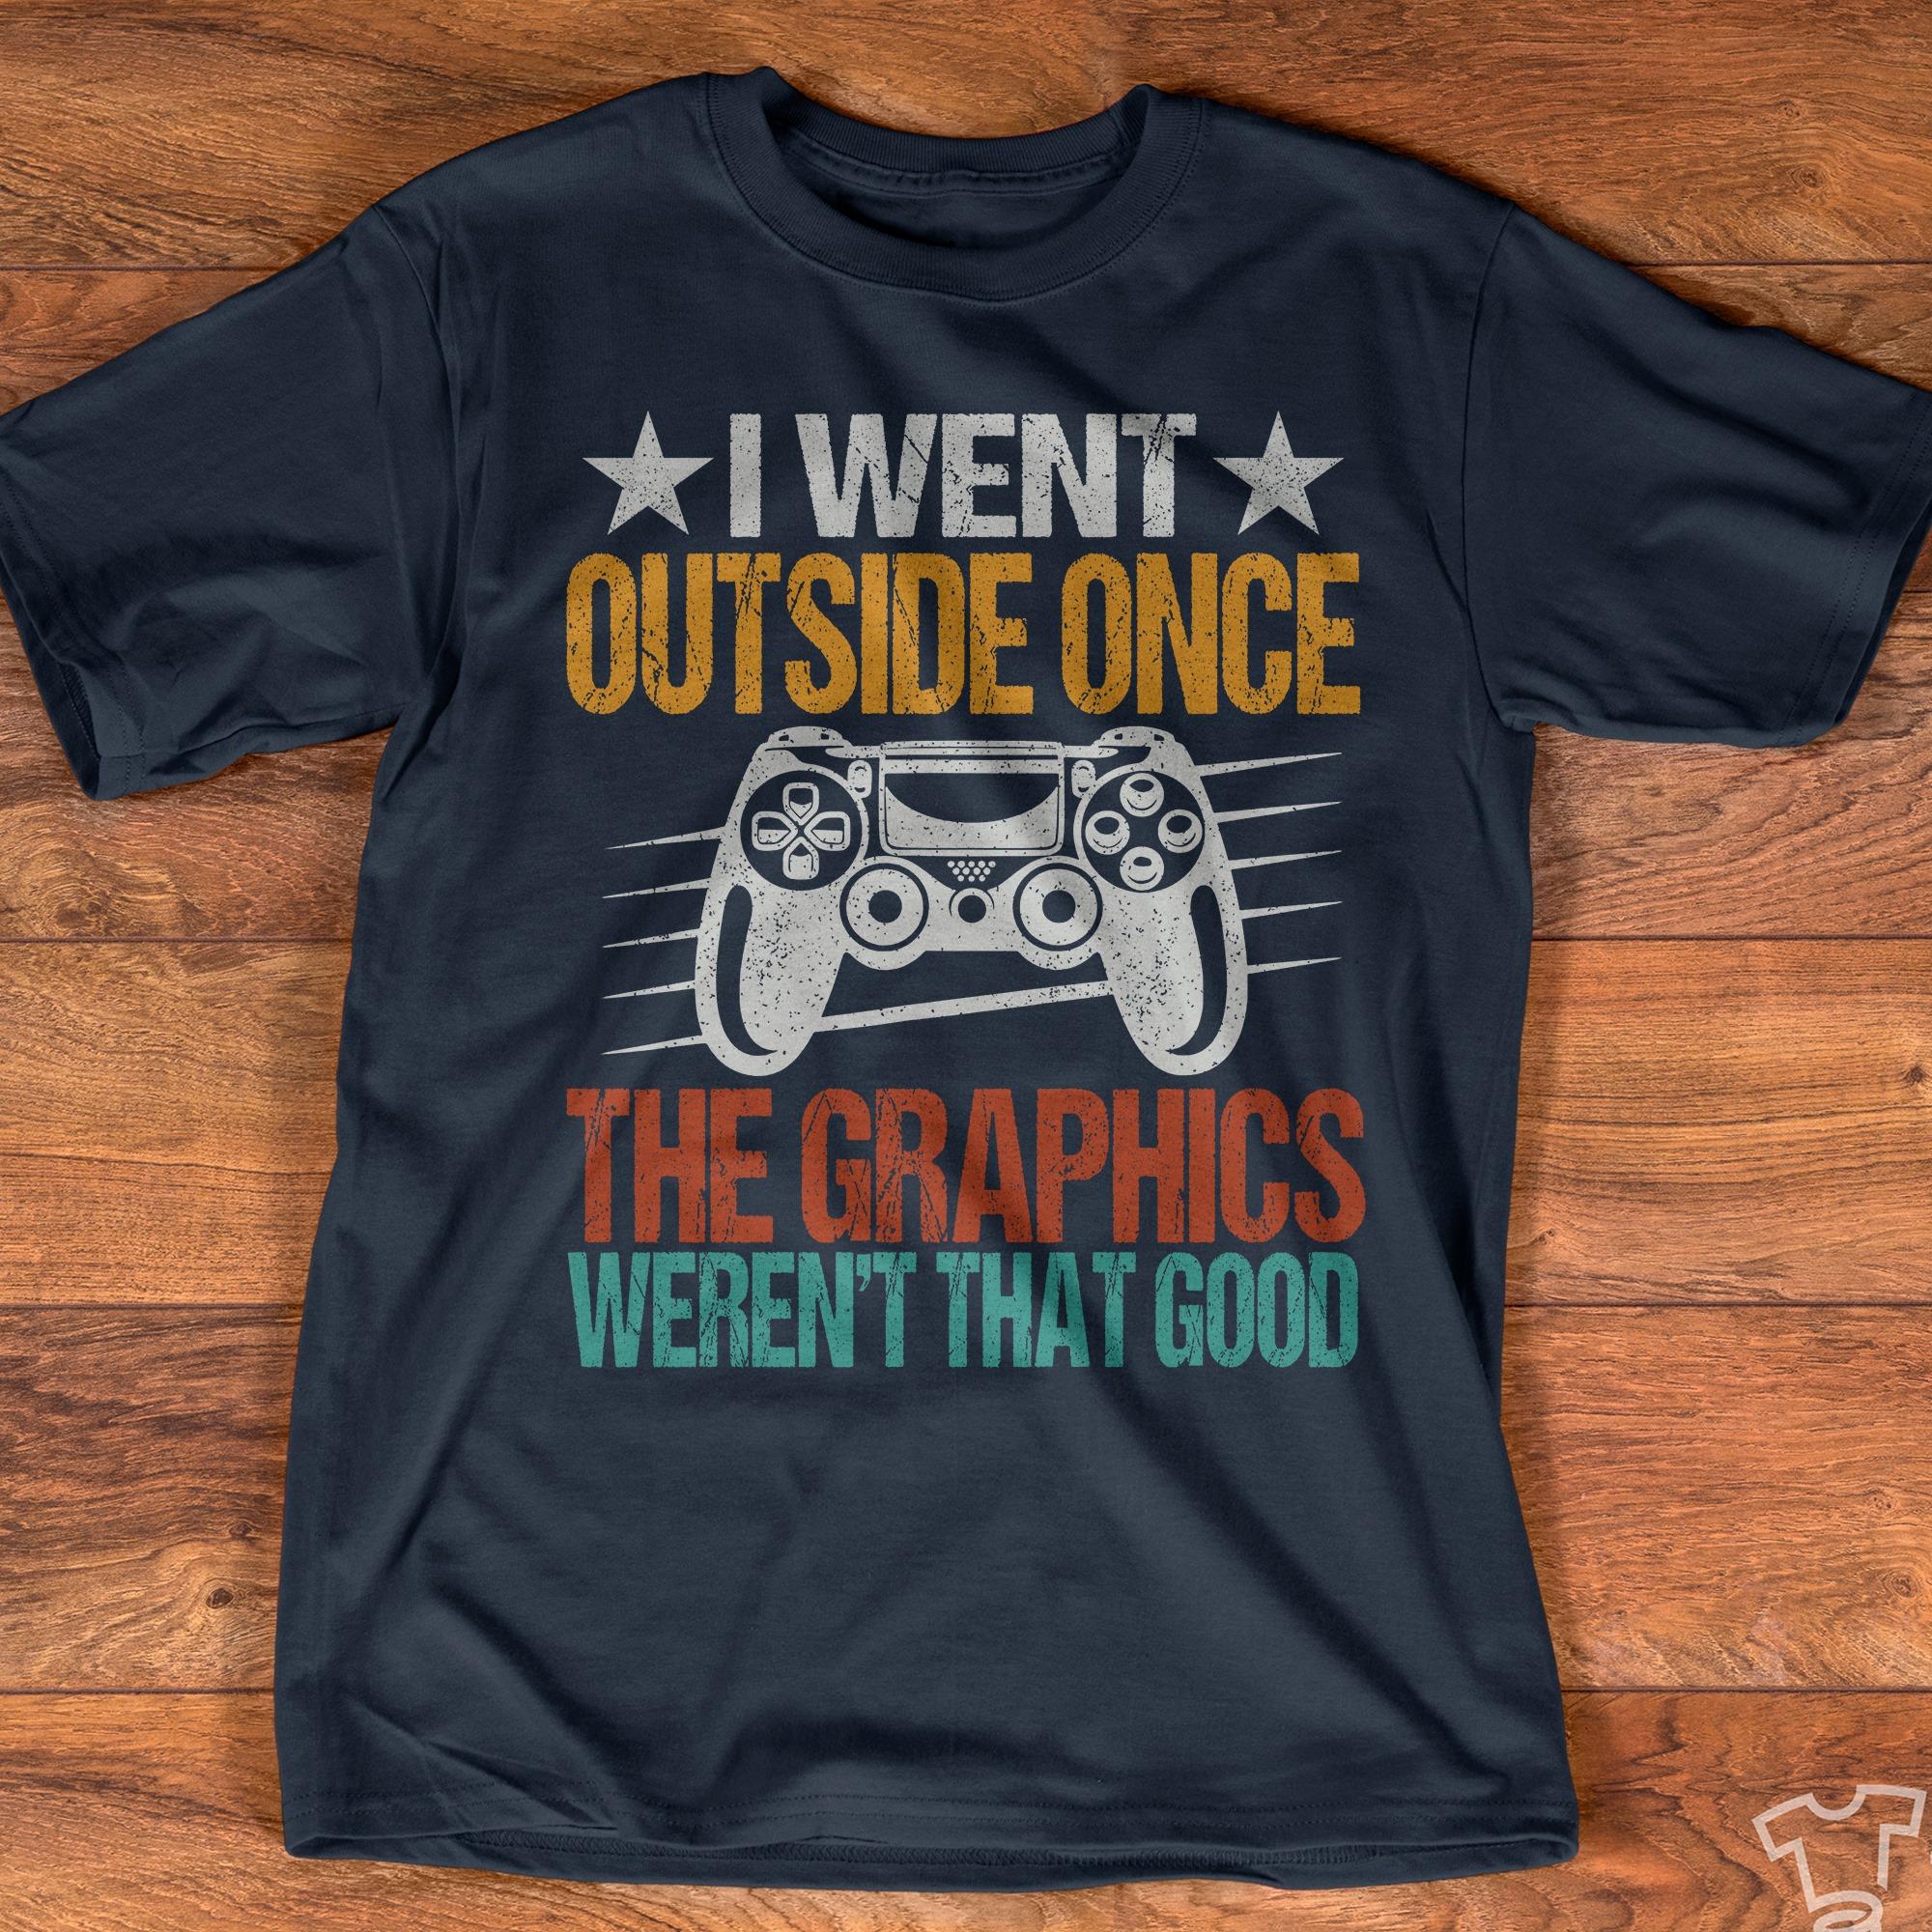 I went outside once, the graphics weren't that good - Love playing video game, playstation sony game